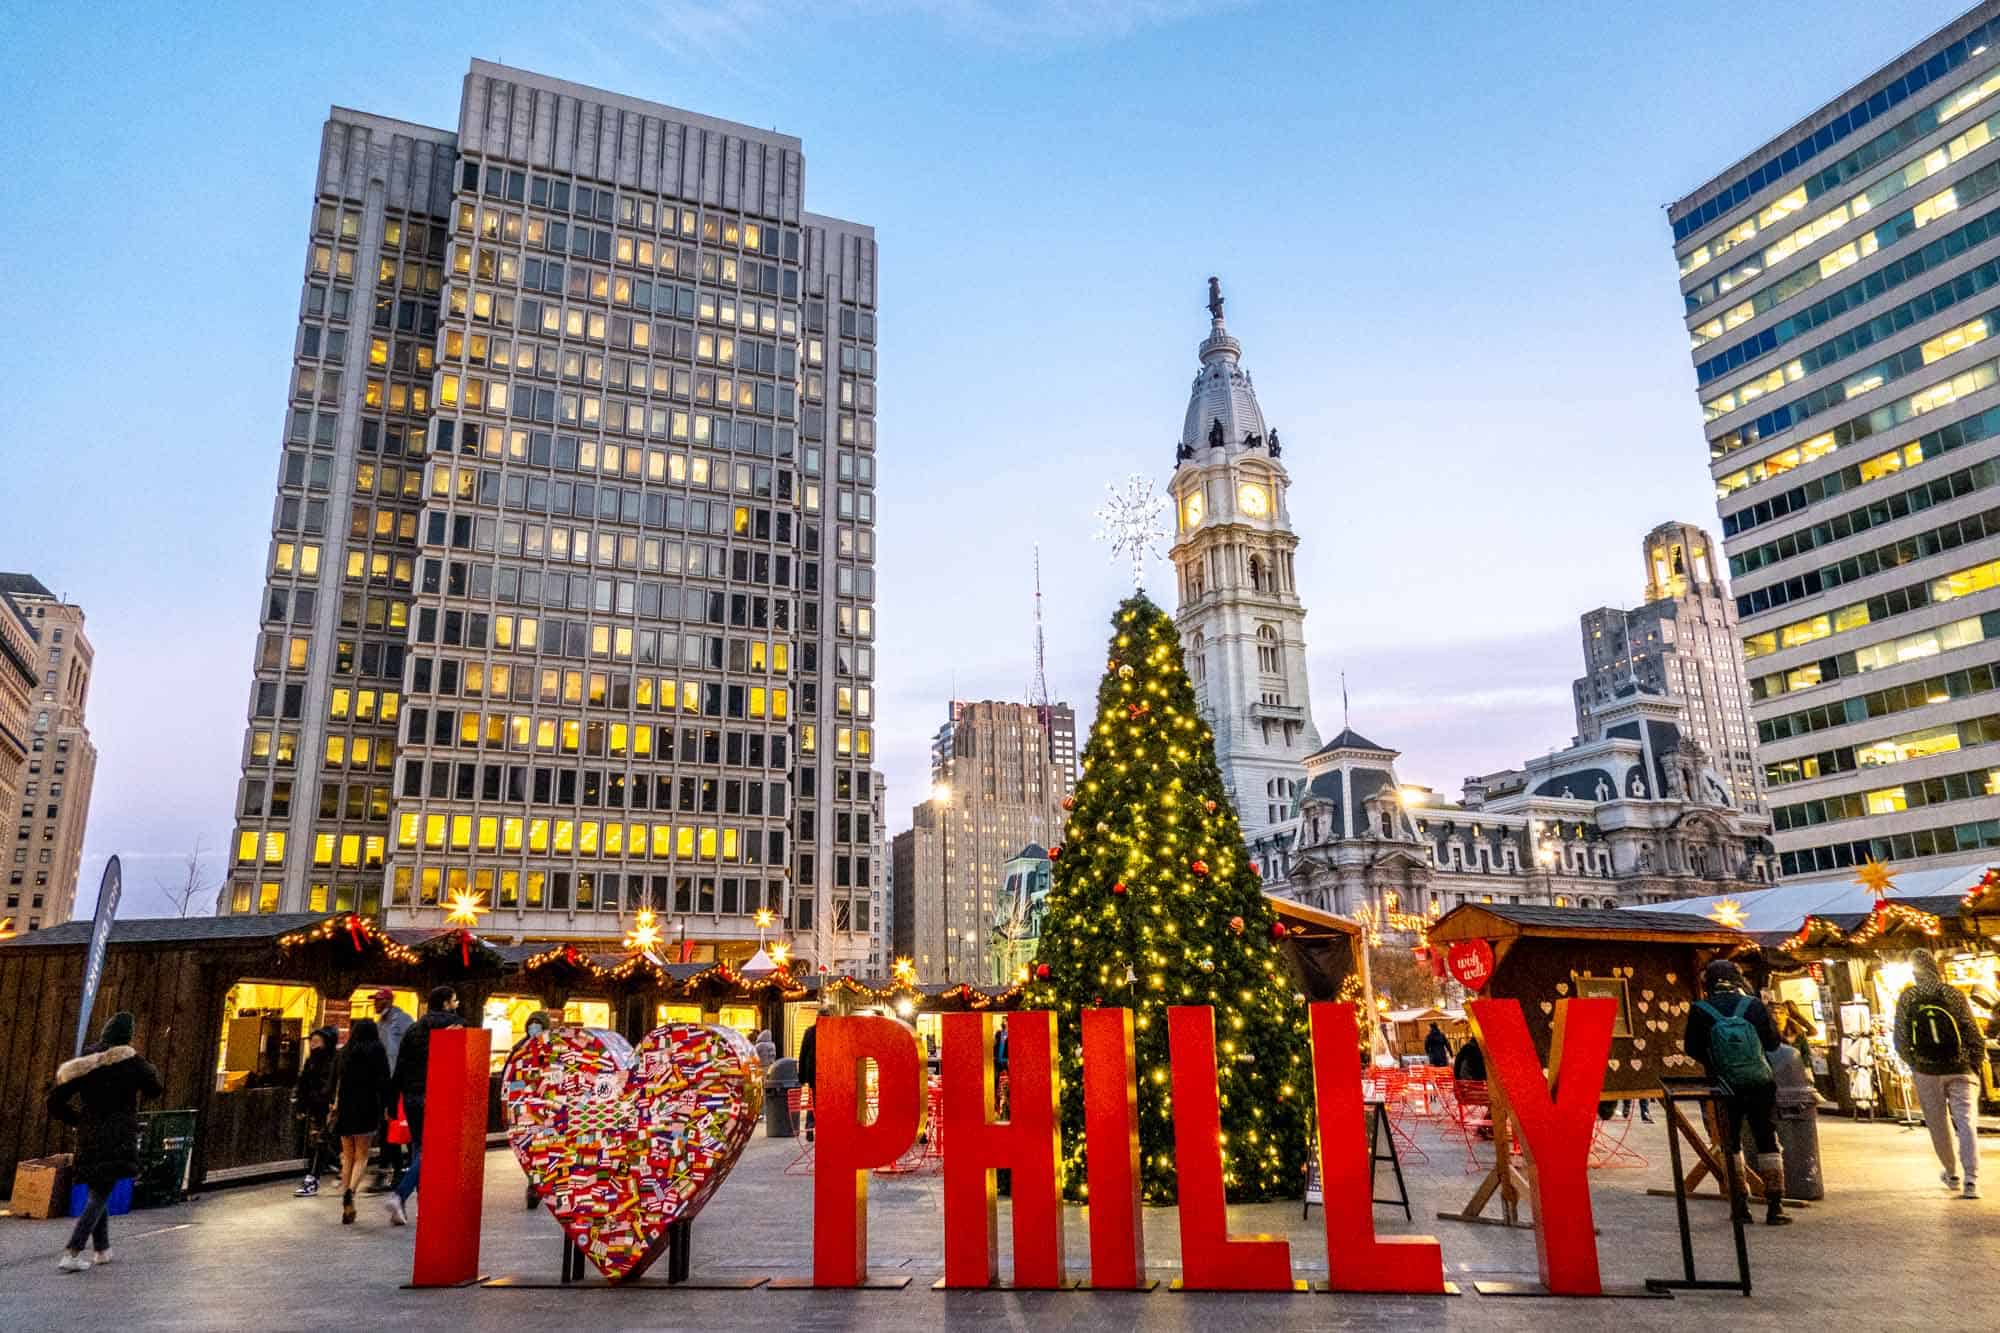 Christmas Village in Philadelphia: What to Expect (2022) - Guide to Philly